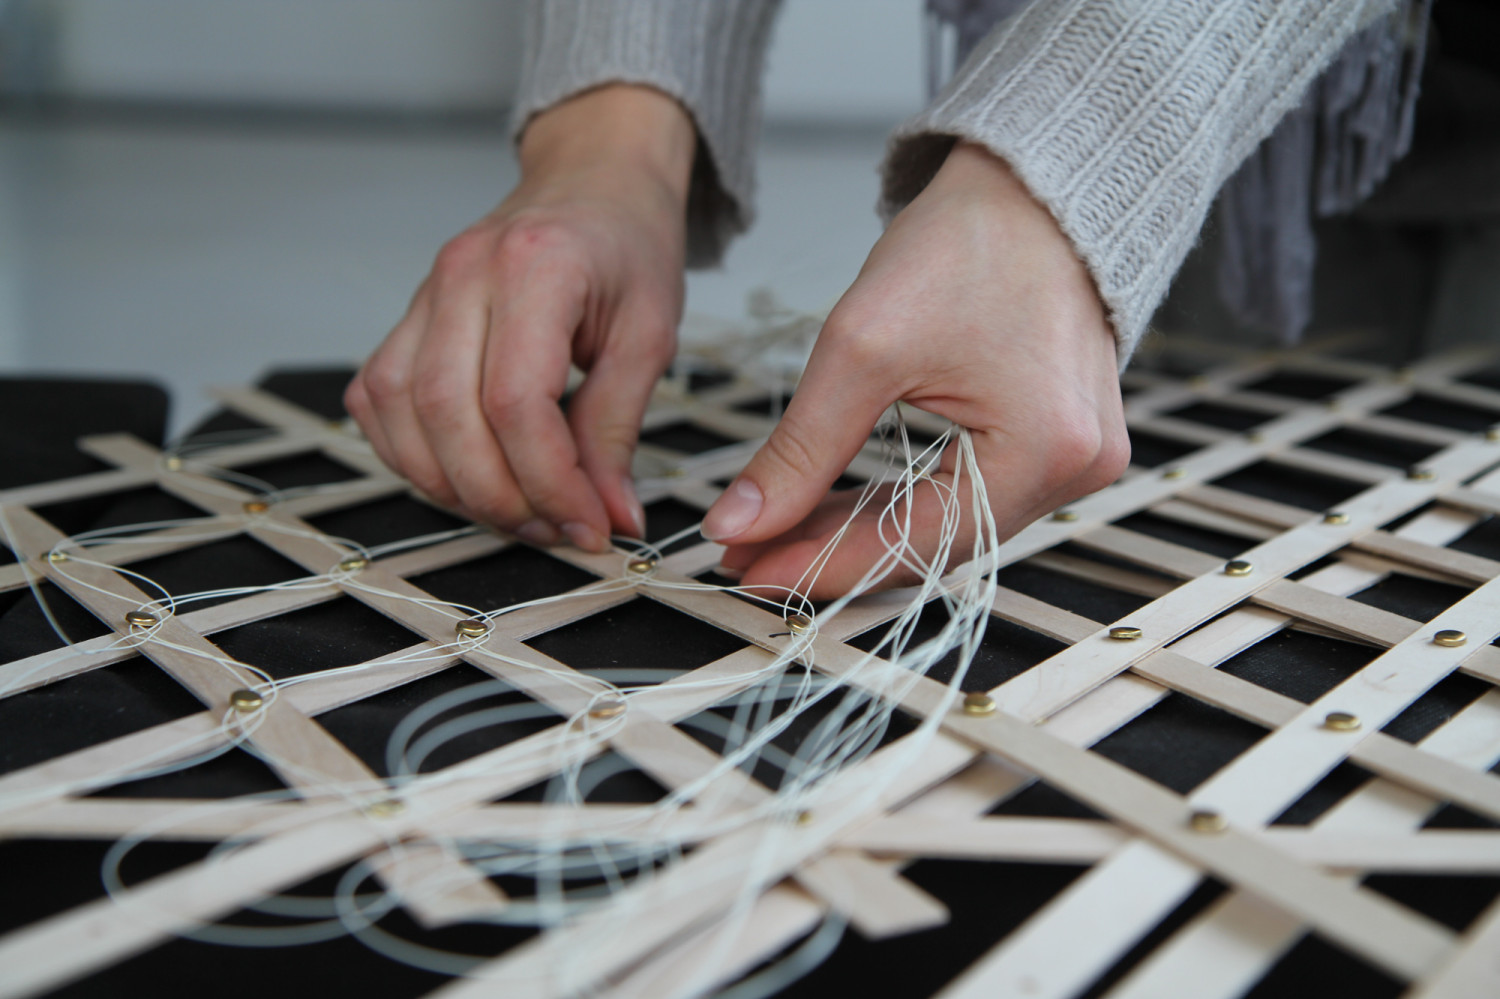 A creative workshop that explored smart textiles and interdisciplinary experiments for 2011 Kauno Bienale, Lithuania